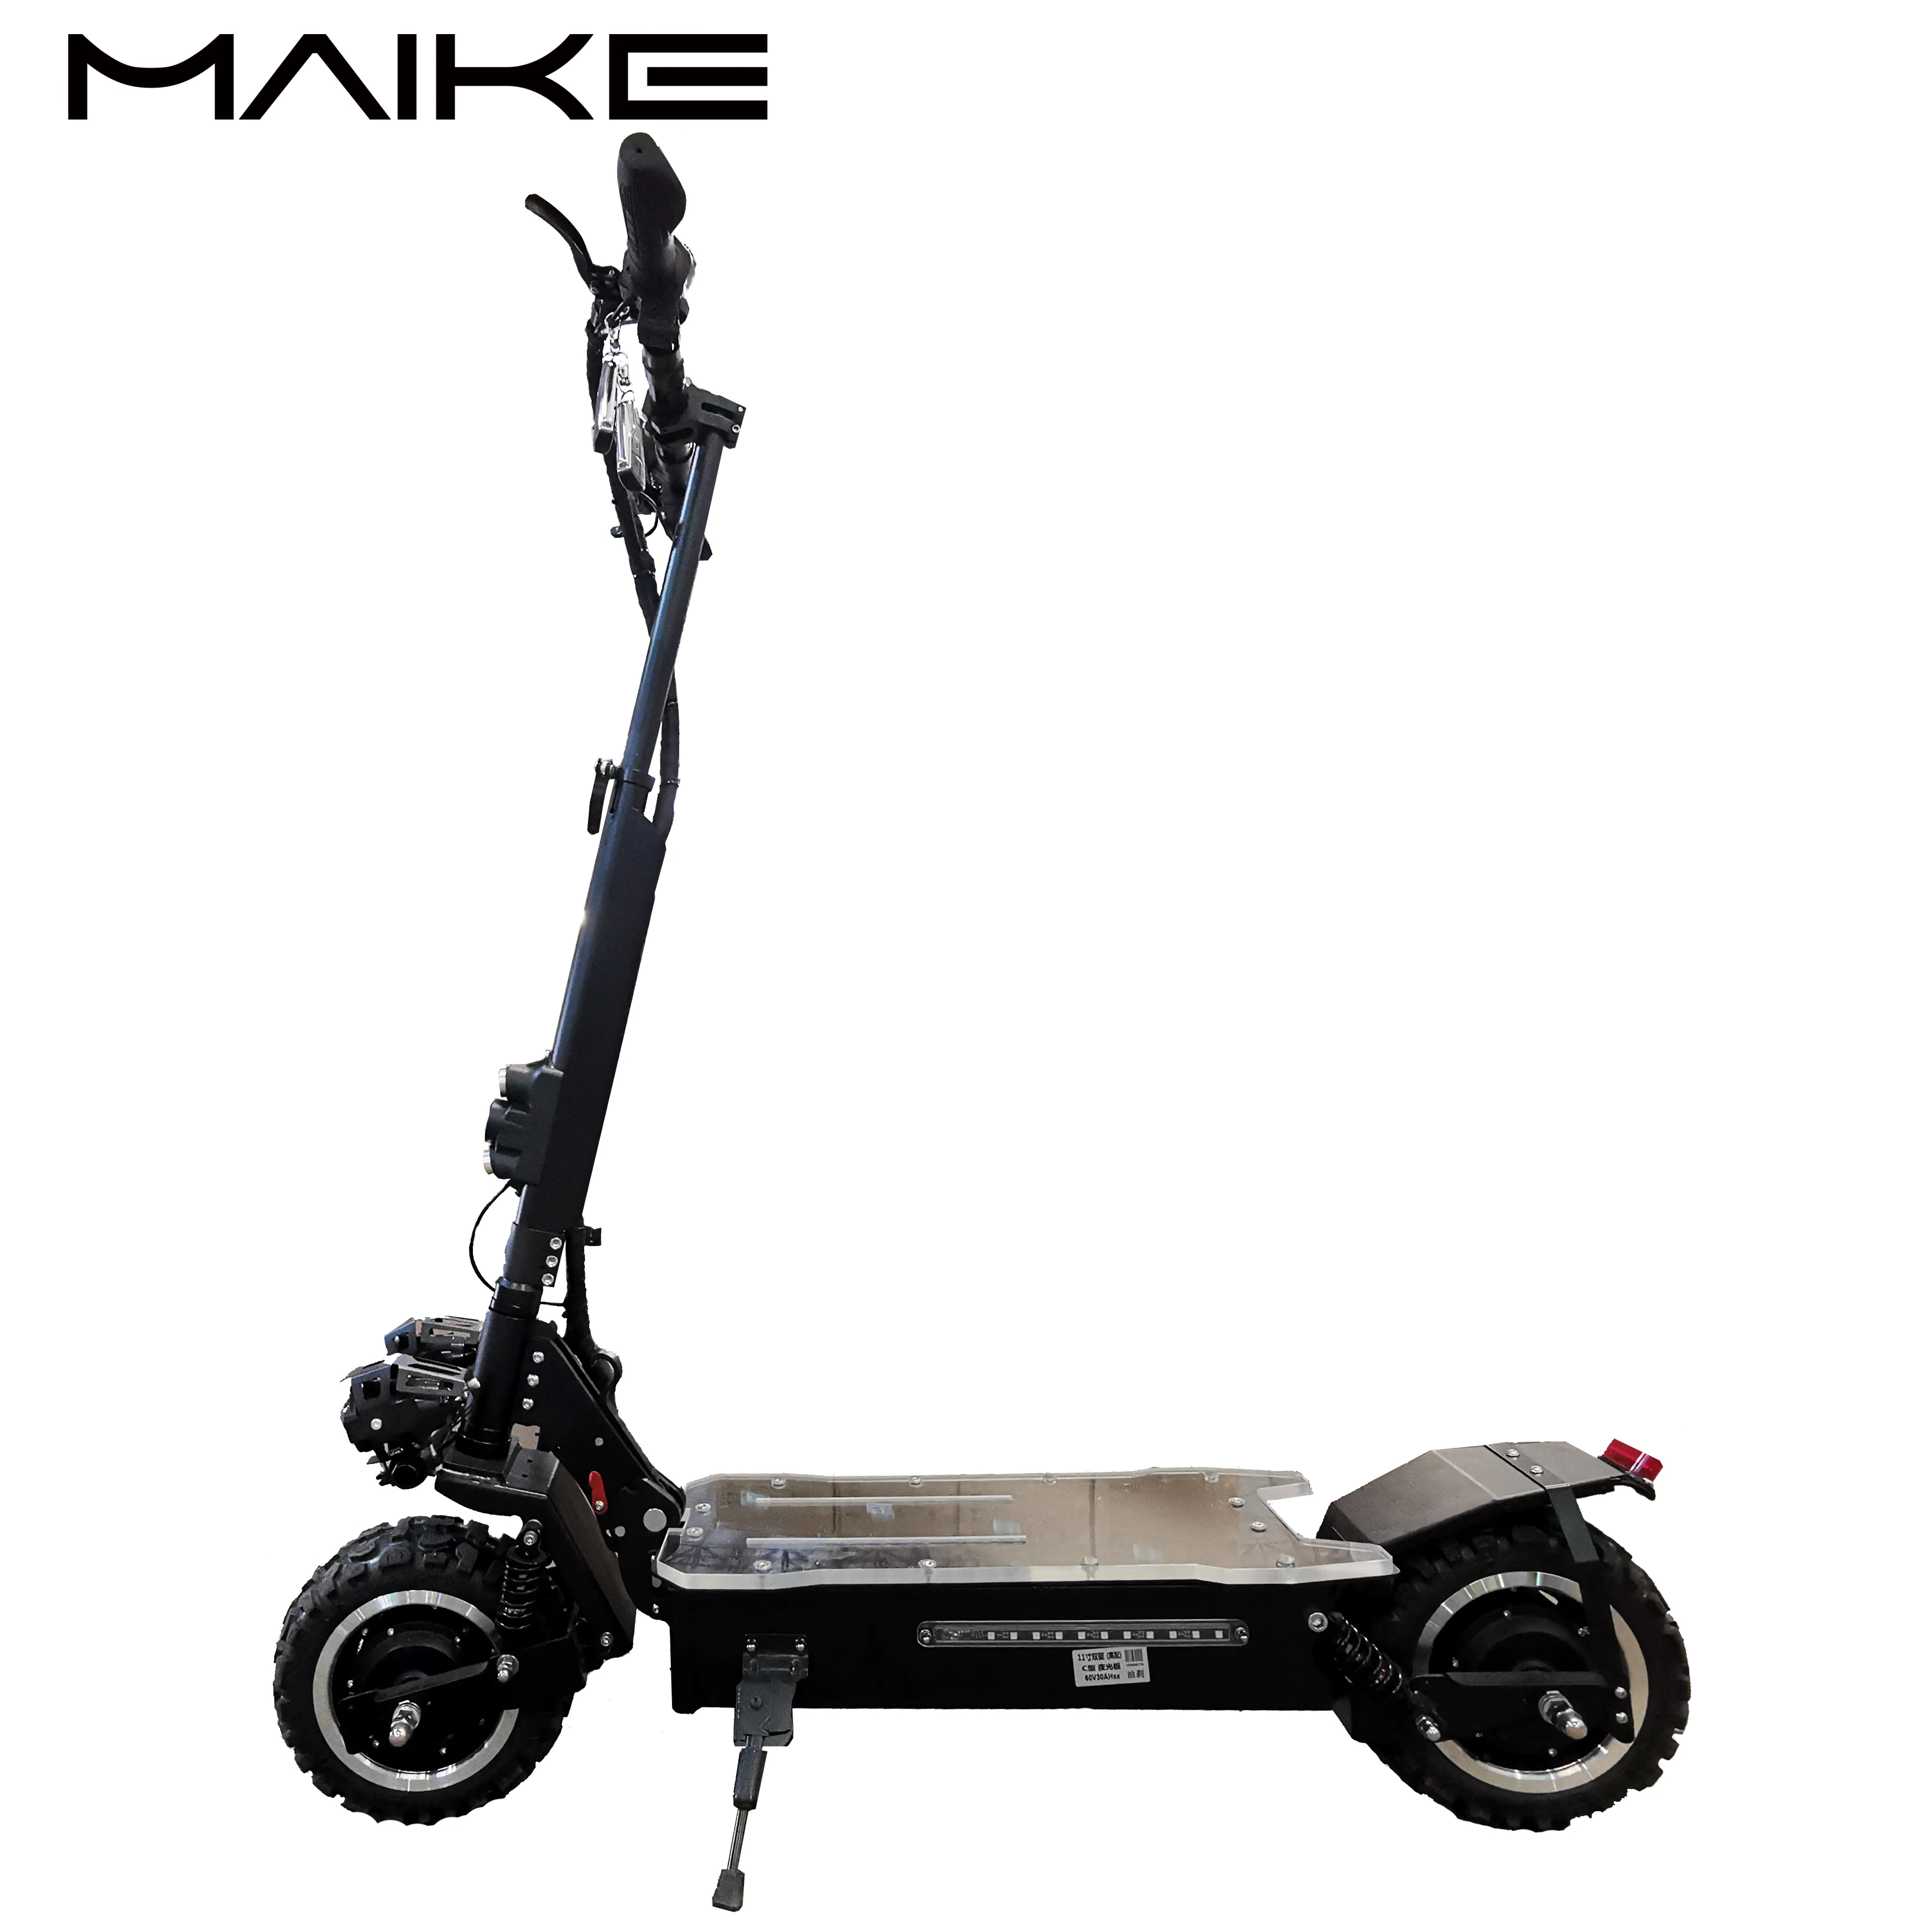 

Maike KK4S off road tire 3200W Two Dual Motor Adults Electric Mobility Scooter For Sale, Black